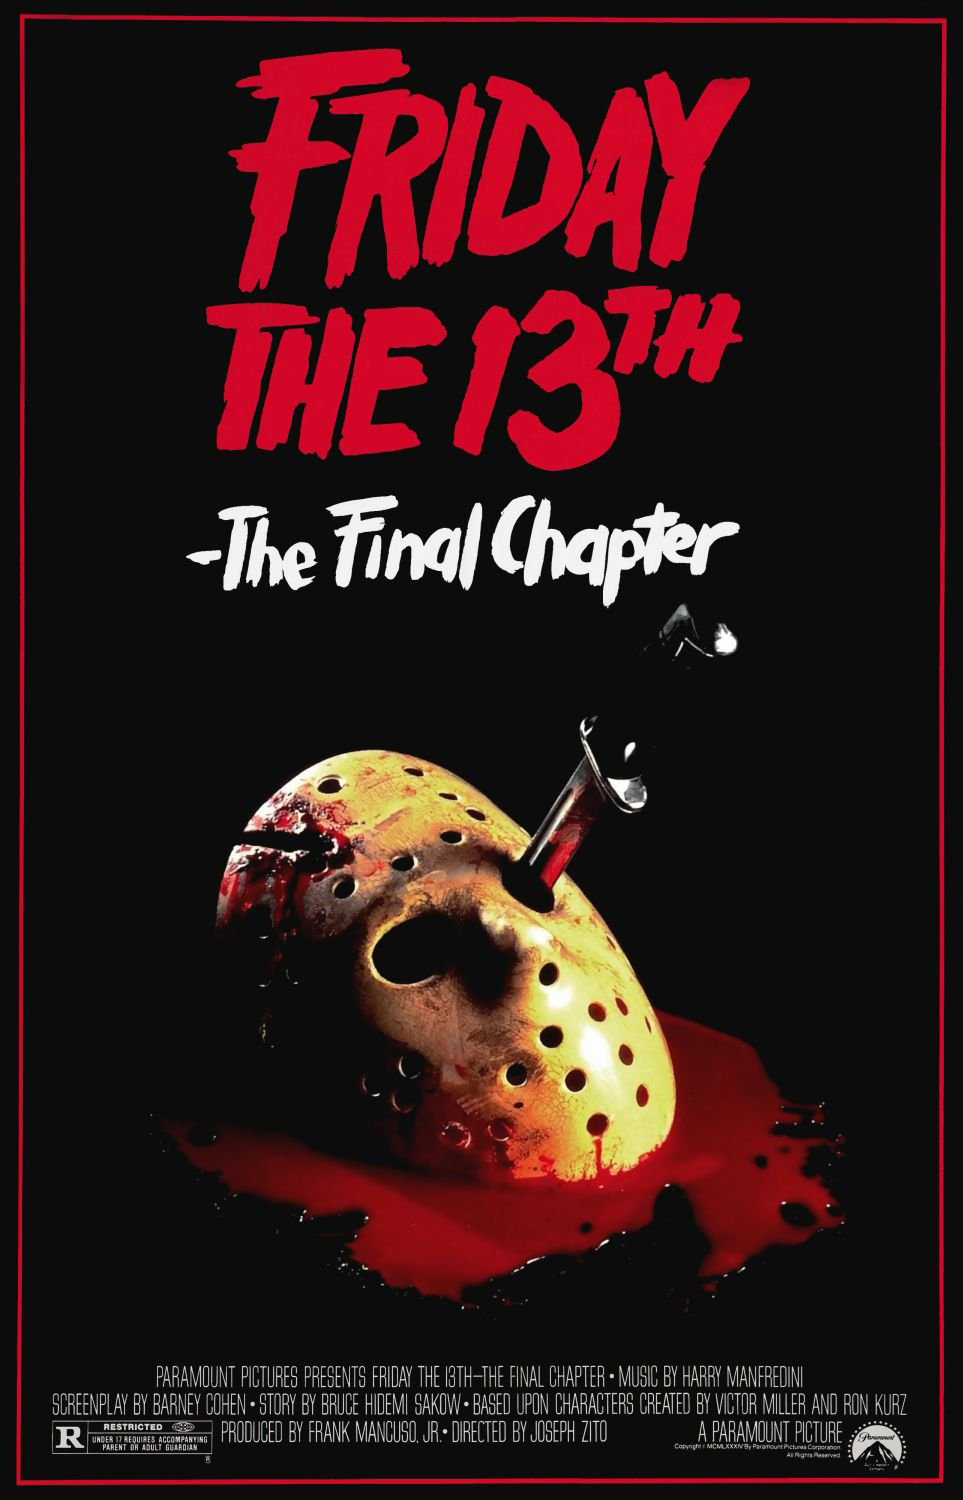 The Original Opening Of Friday the 13th 1980 - Friday The 13th